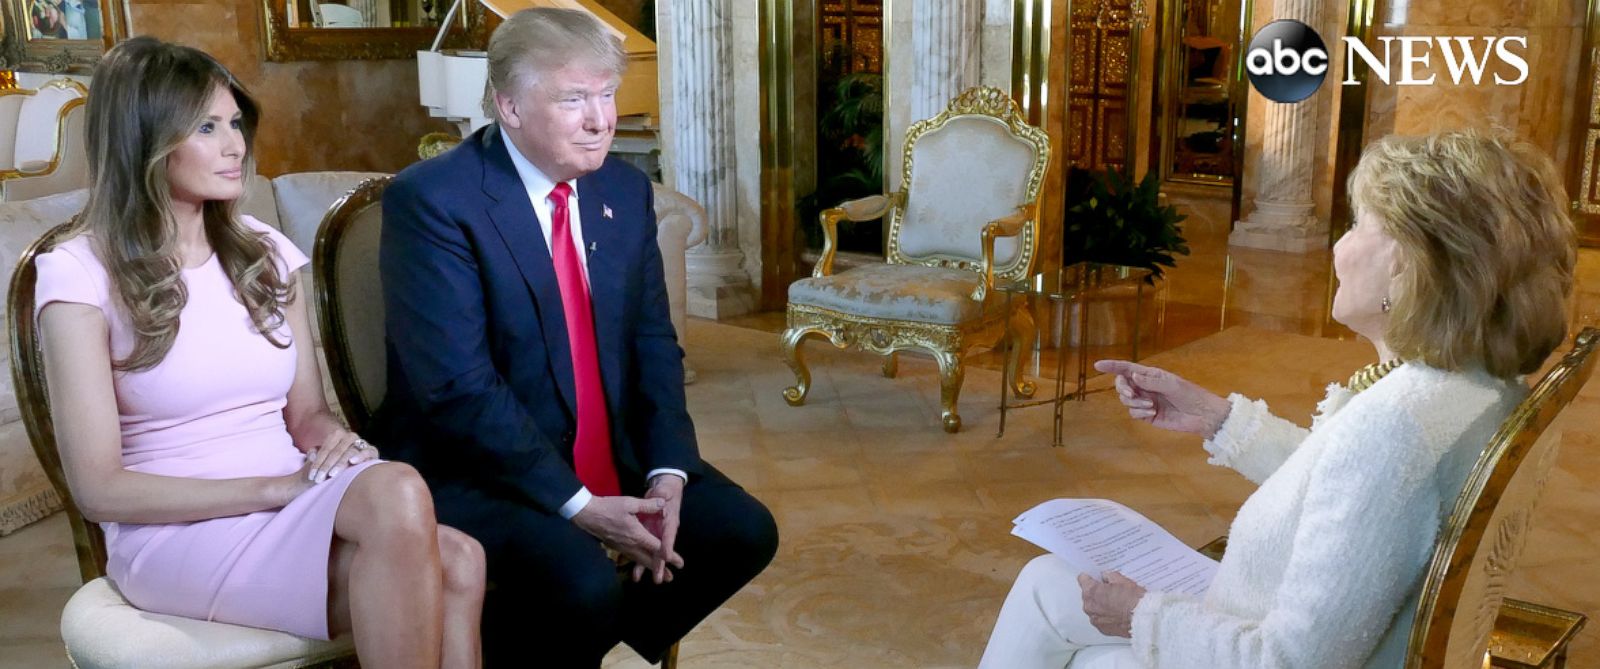 PHOTO: Donald and Melania Trump sat down with Barbara Walters for an interview to air on ABC News "20/20."